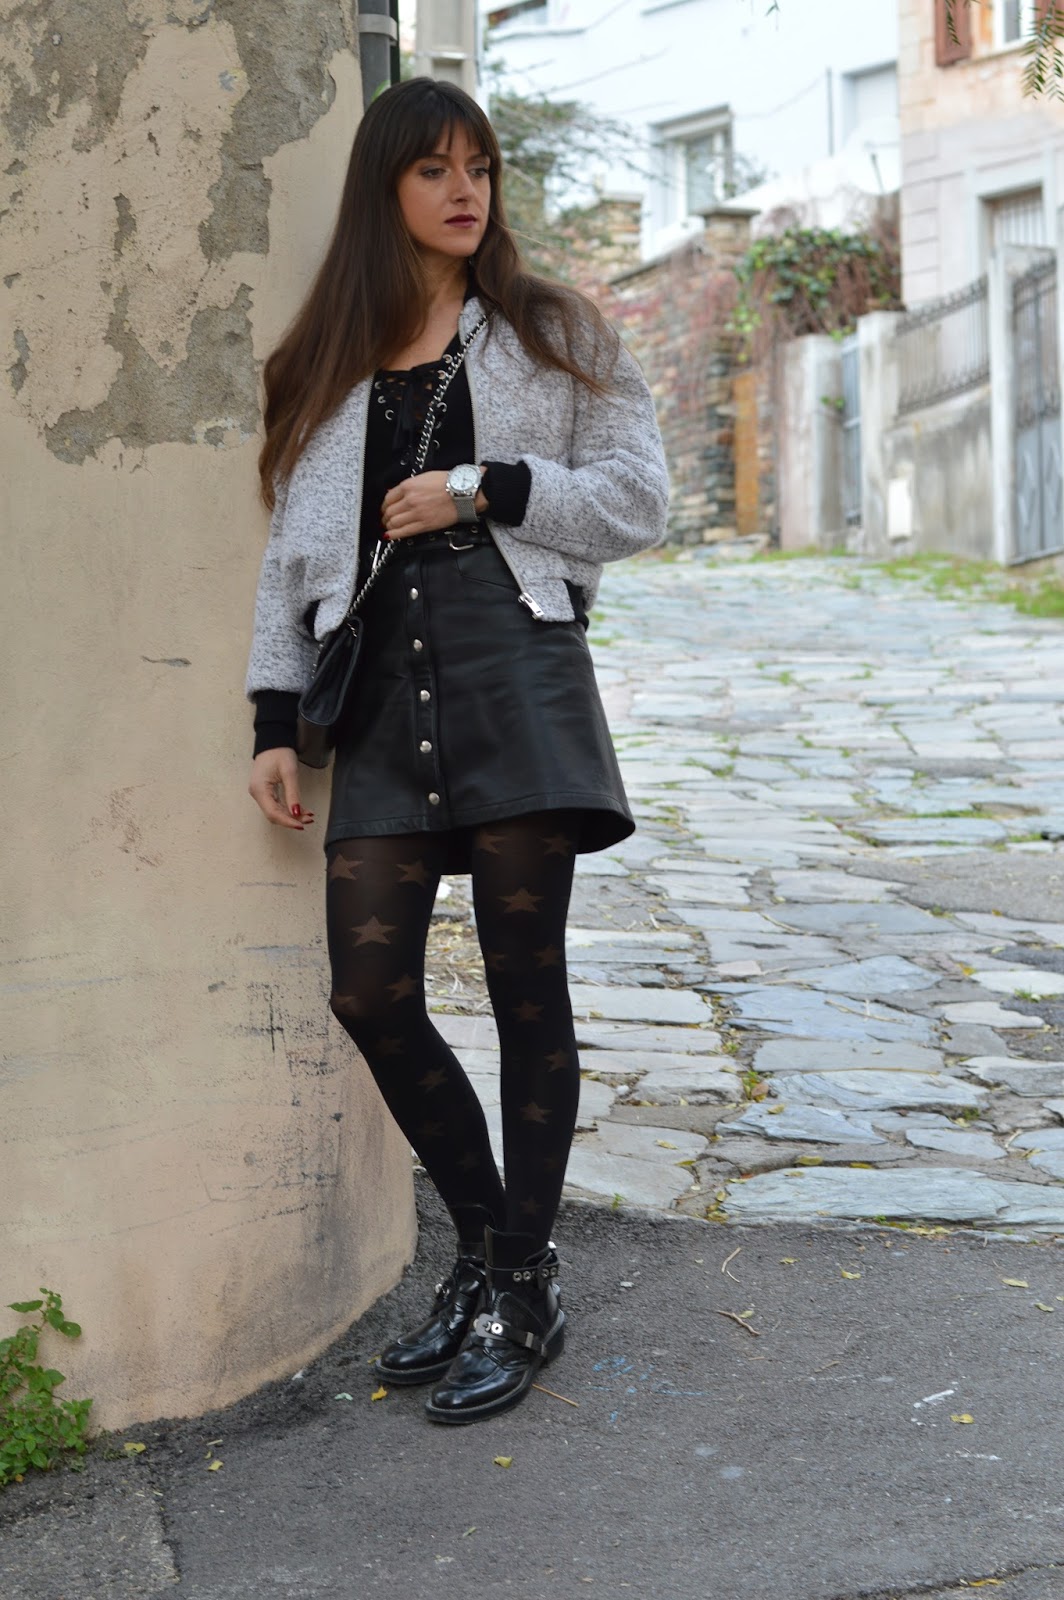 Fashion Musings Diary: The Kooples and Balenciaga: My Sporty Chic Meets ...